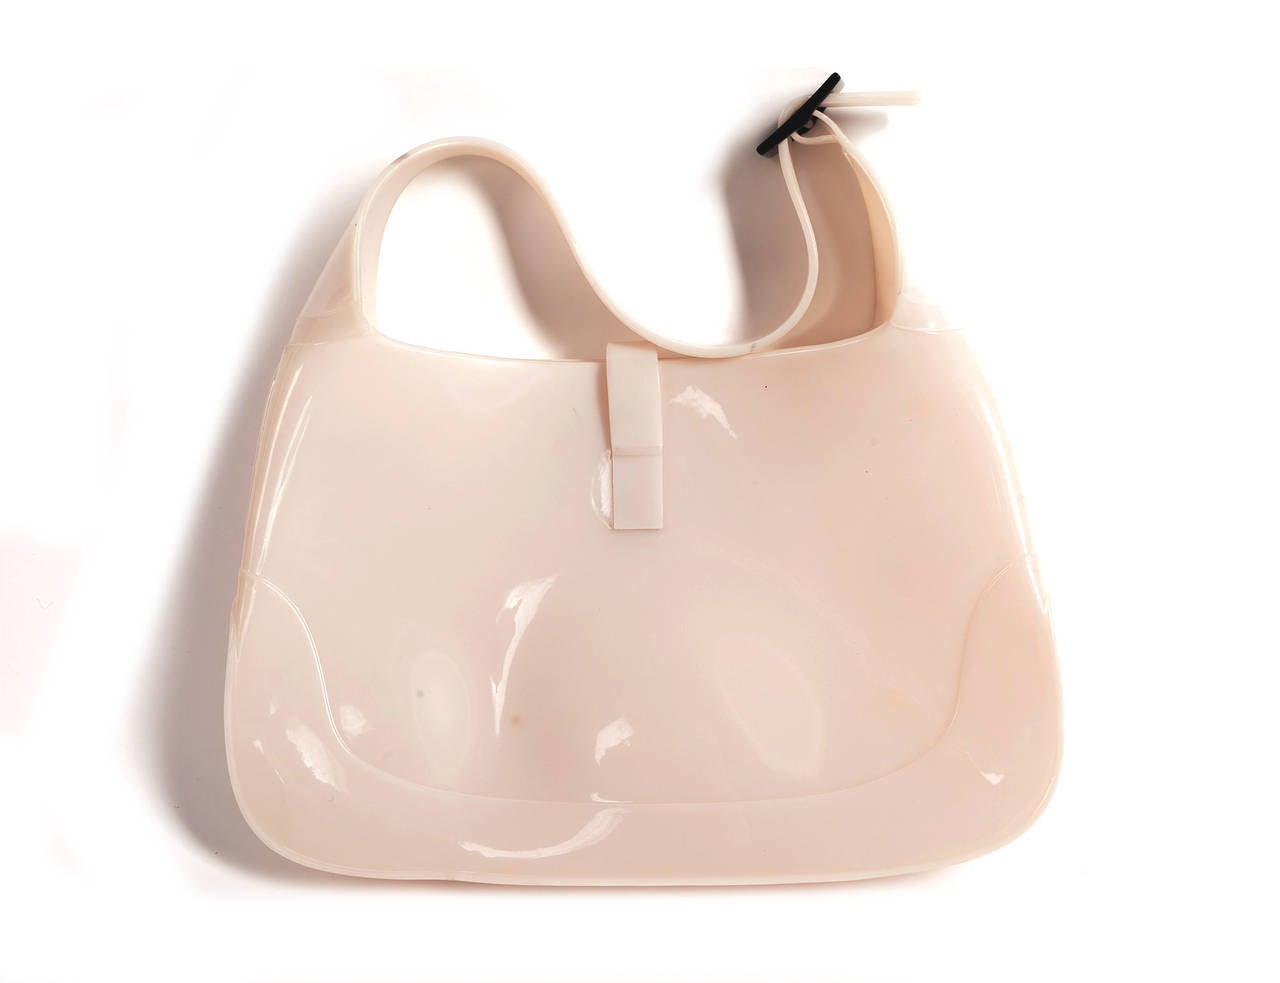 Iconic Gucci by Tom Ford Opalescent Jackie hobo rubber shoulder bag. Bag is in a milky white rubber texture and color with all the iconic details of the Jackie Hobo Bag, black plastic clasp closure, side black buckle, Extreme Futuristic luxury from